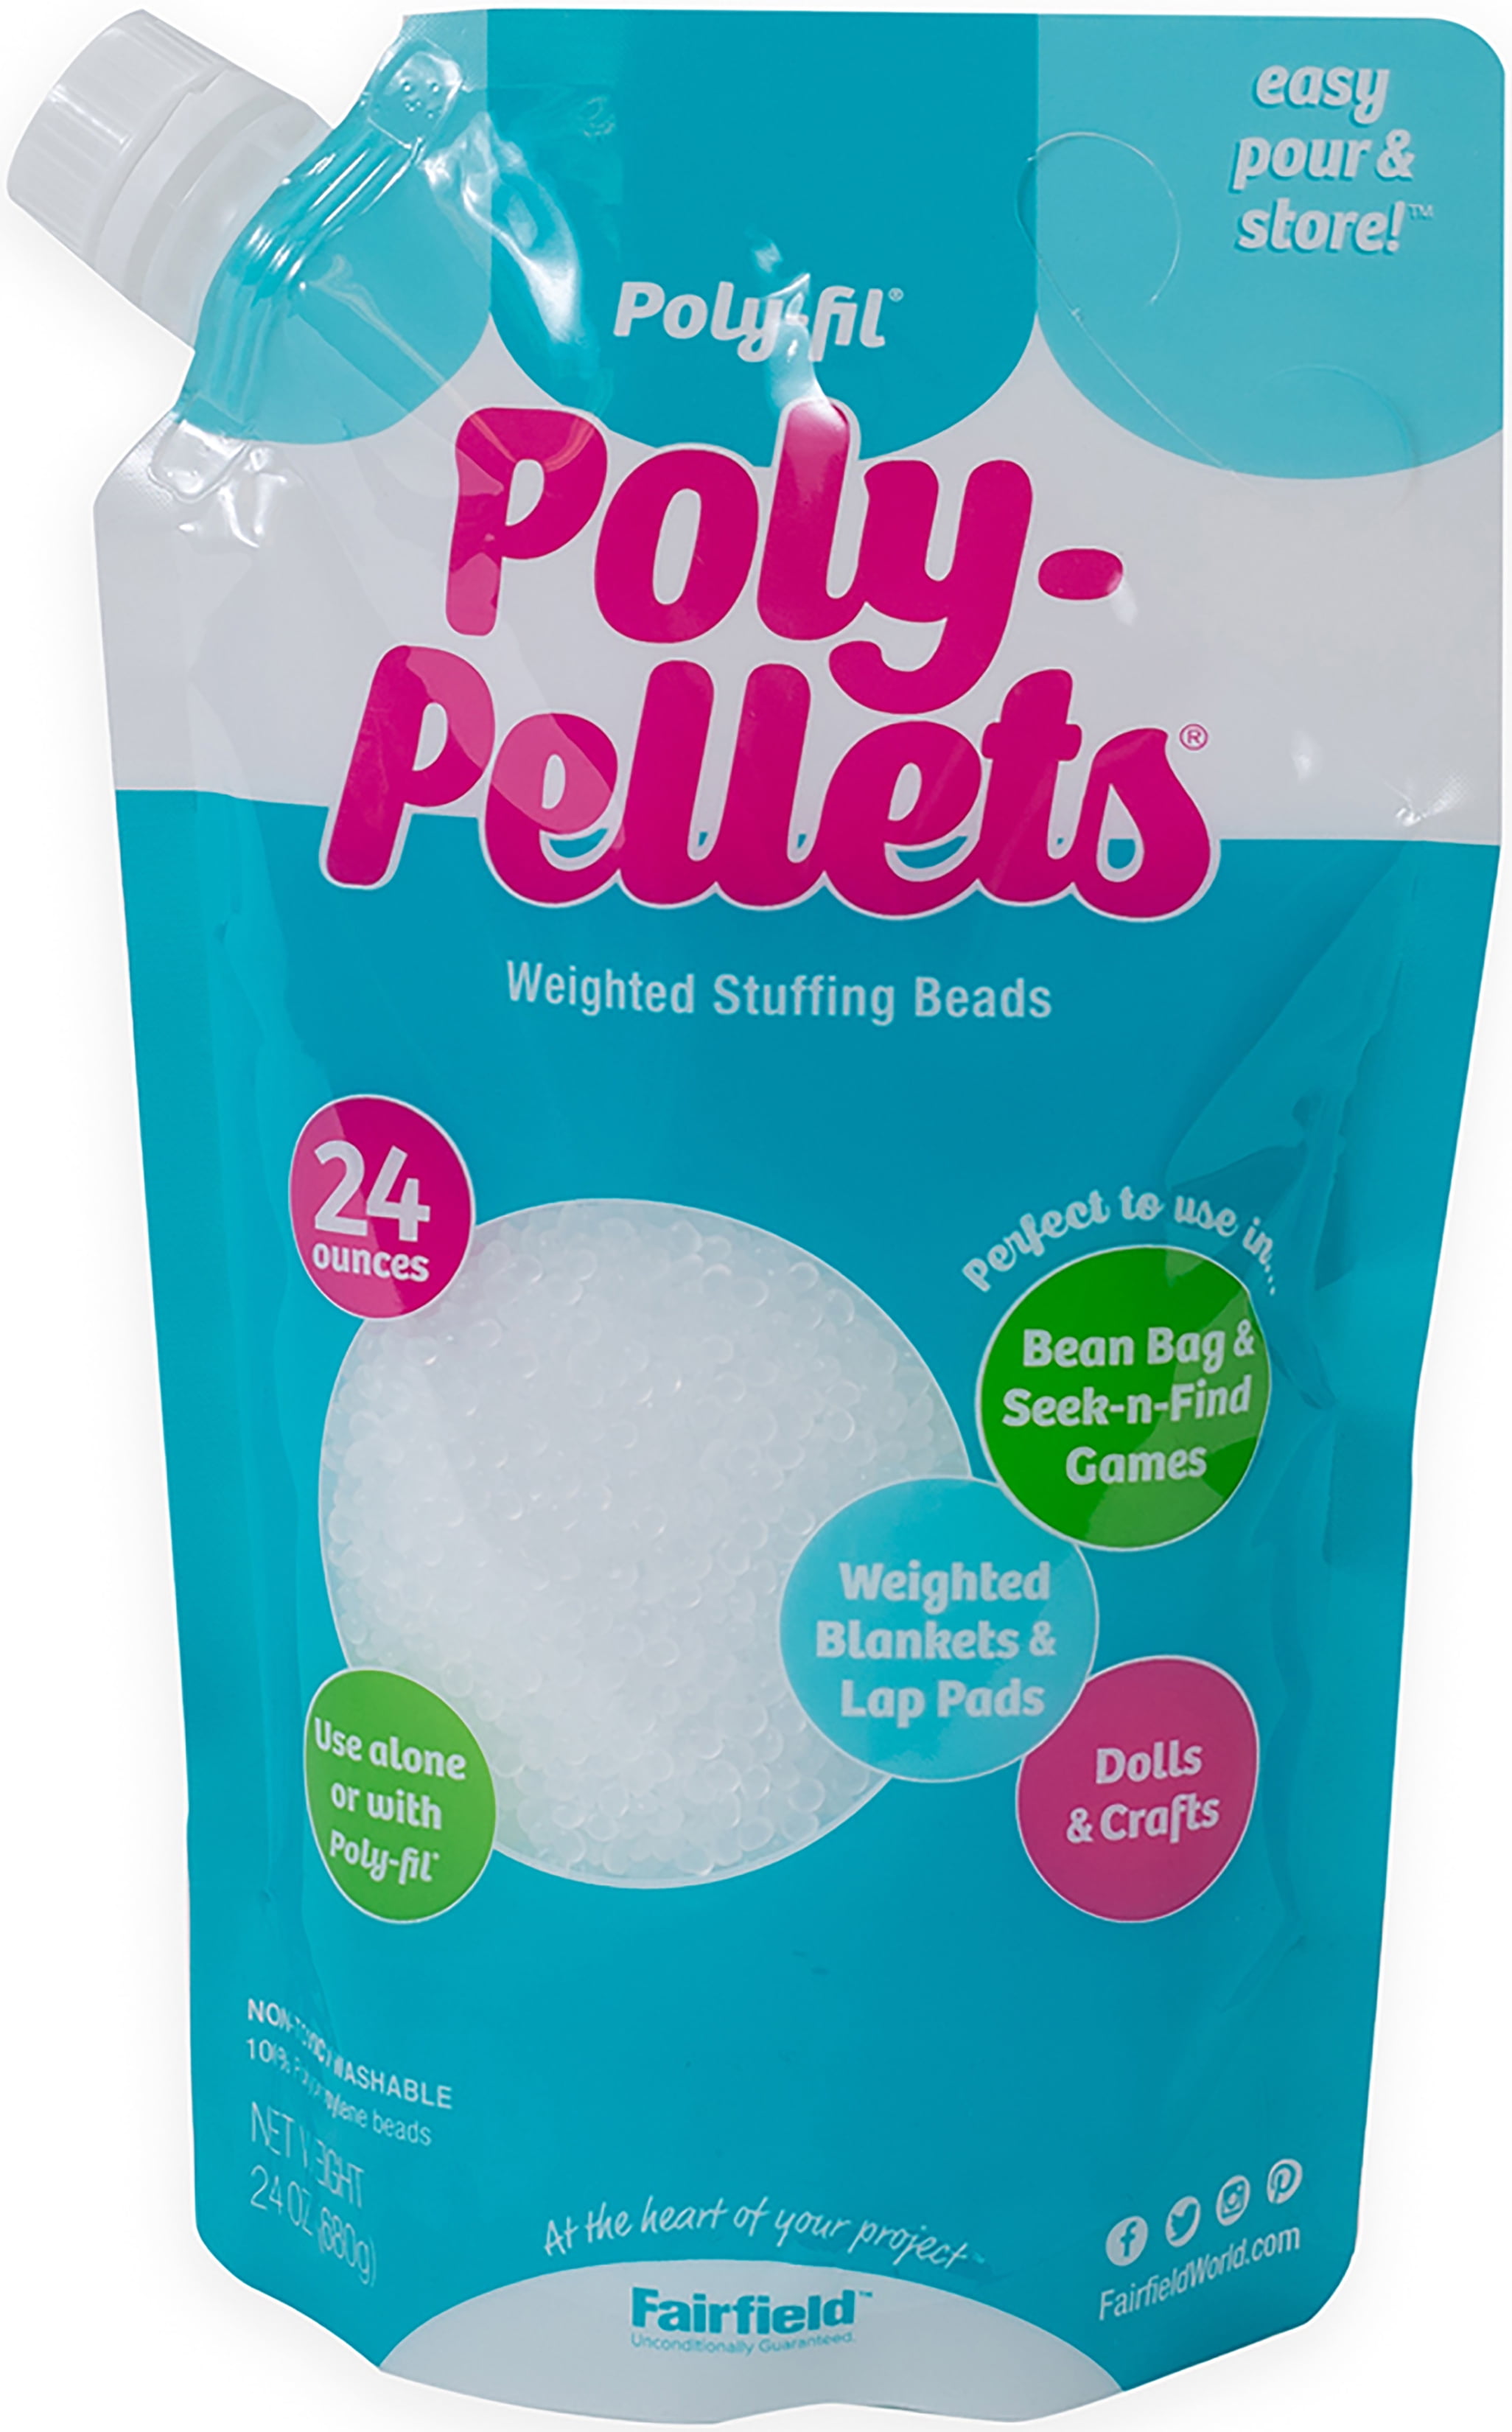 Poly-Fil Poly-Pellets Stuffing Beads